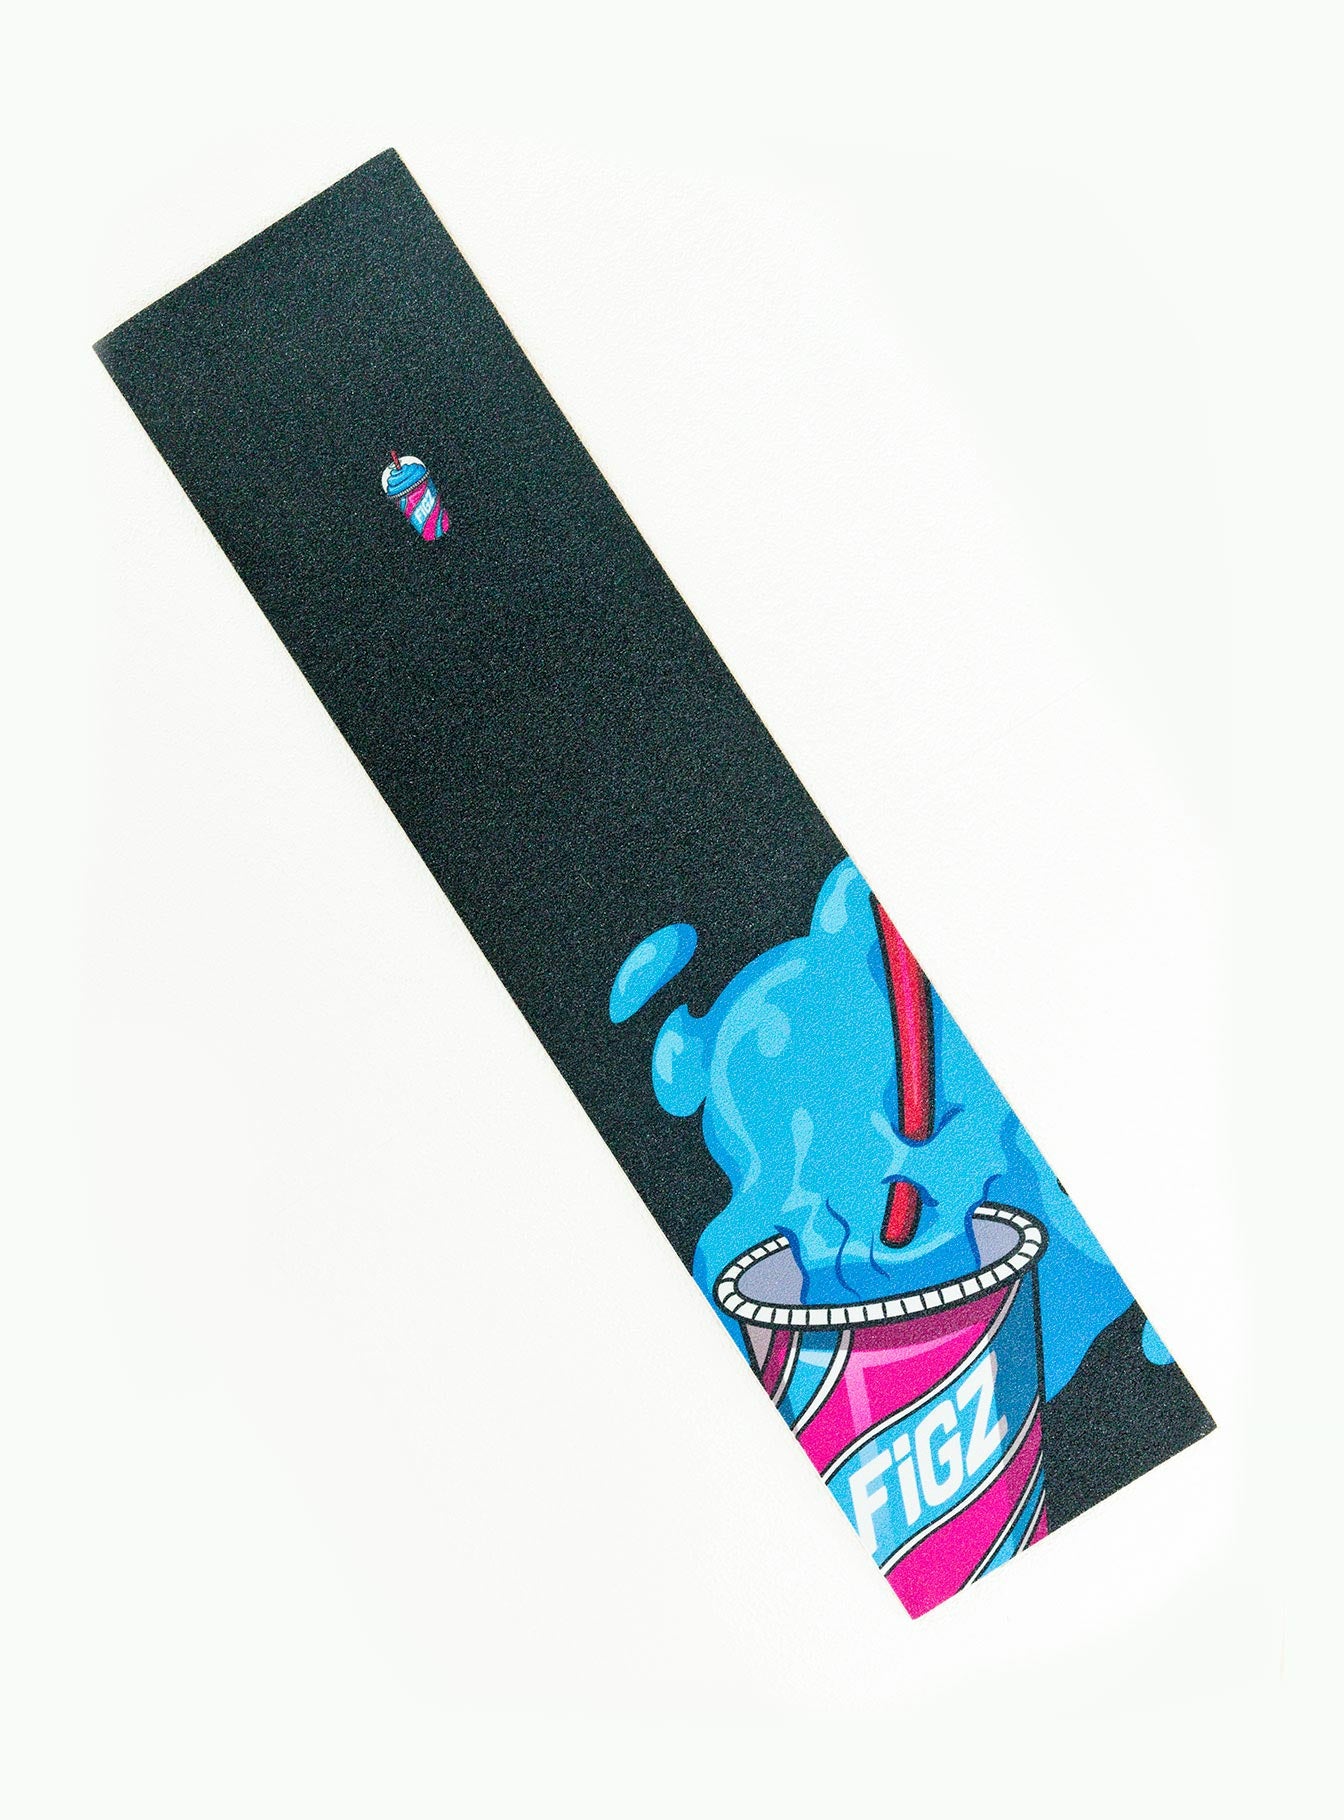 Scooter Grip Tape - Buy Scooter Grip Tapes in Awesome Designs